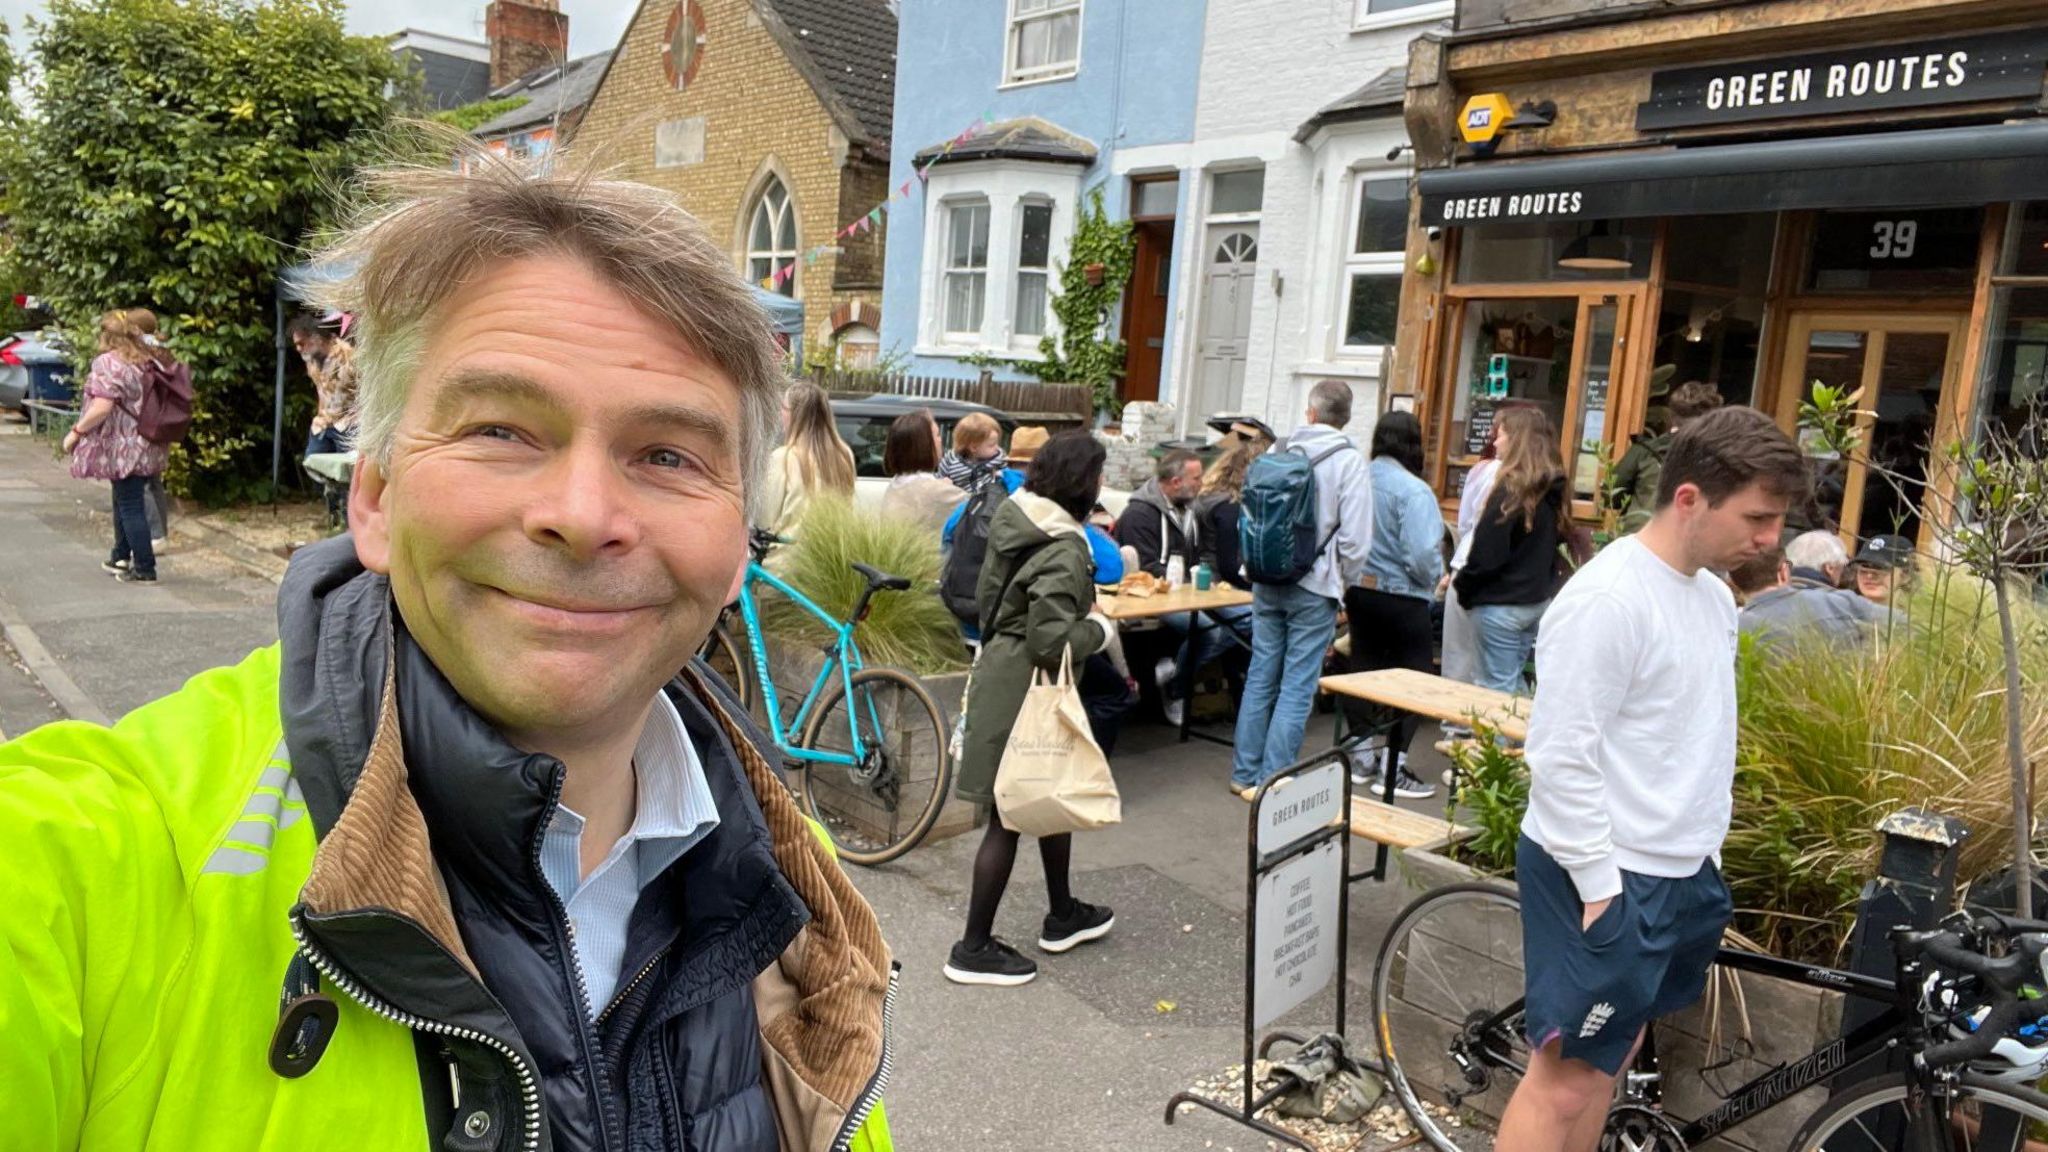 Andrew Gant at the food festival. He is in the foreground wearing a florescent yellow jacket over a black puffer jacket and pale blue shirt. He has short, grey hair. There are several people sitting at a table outside a cafe in the background